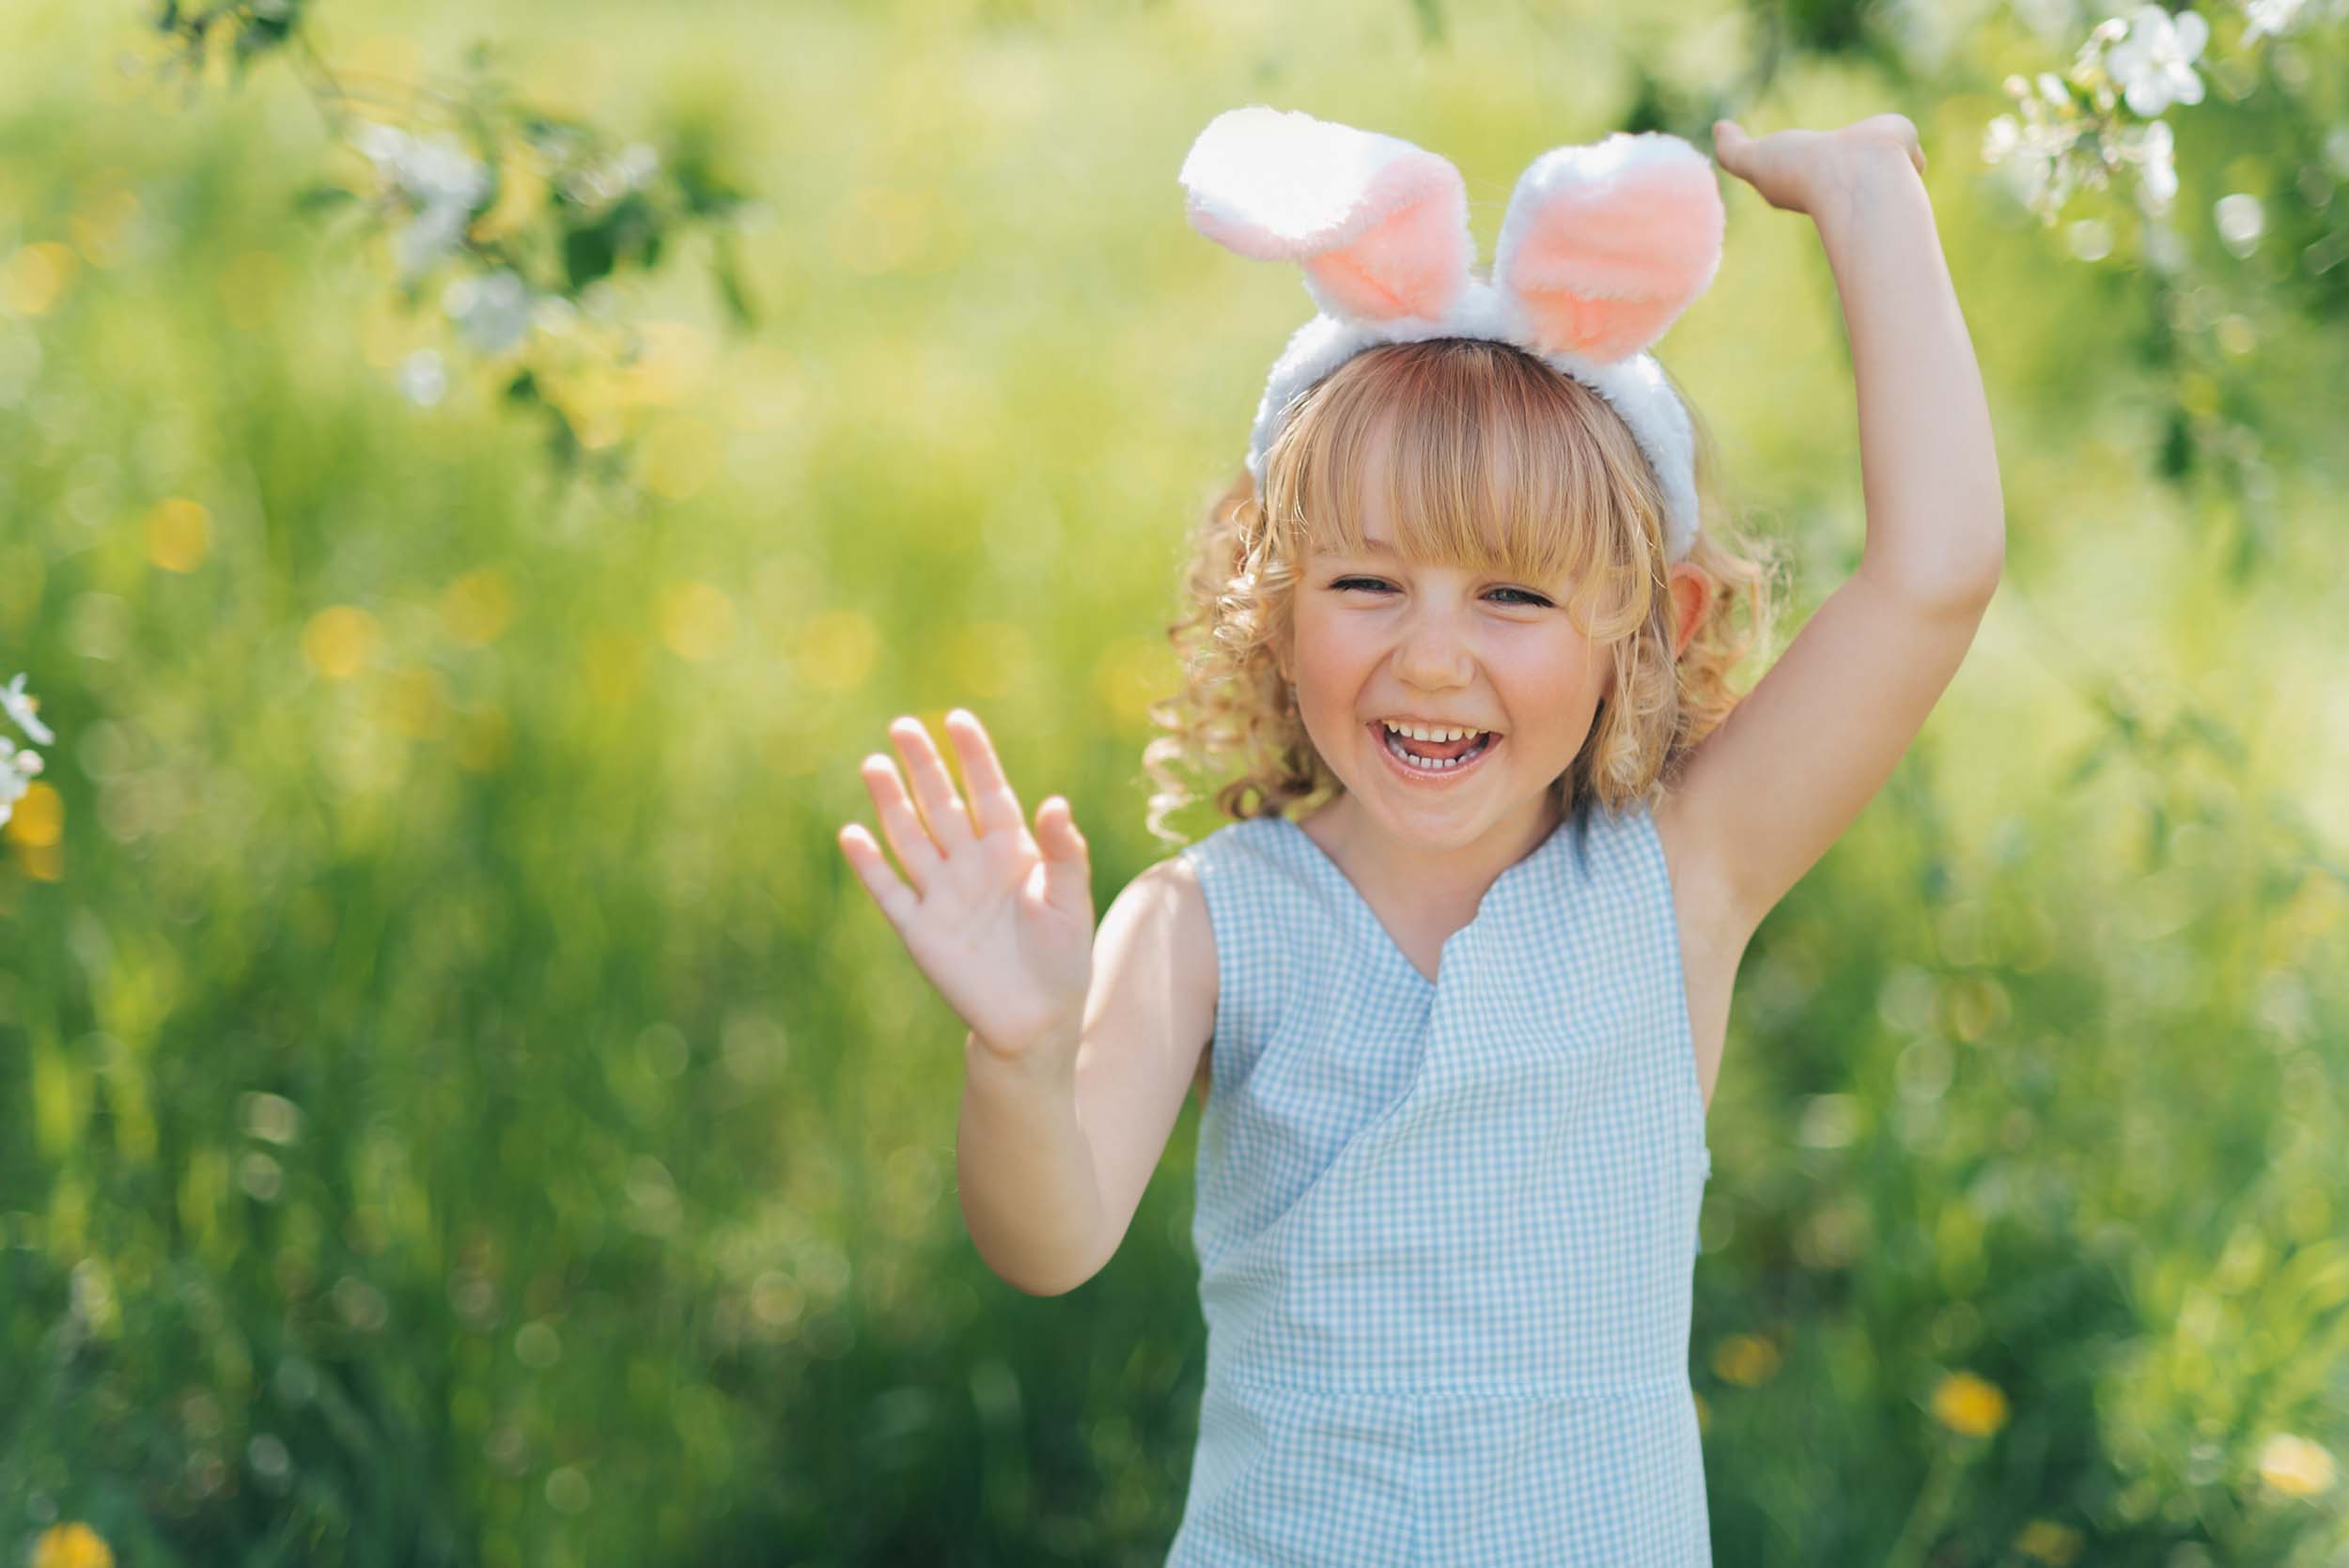 Cute,Funny,Girl,With,Easter,Eggs,And,Bunny,Ears,At